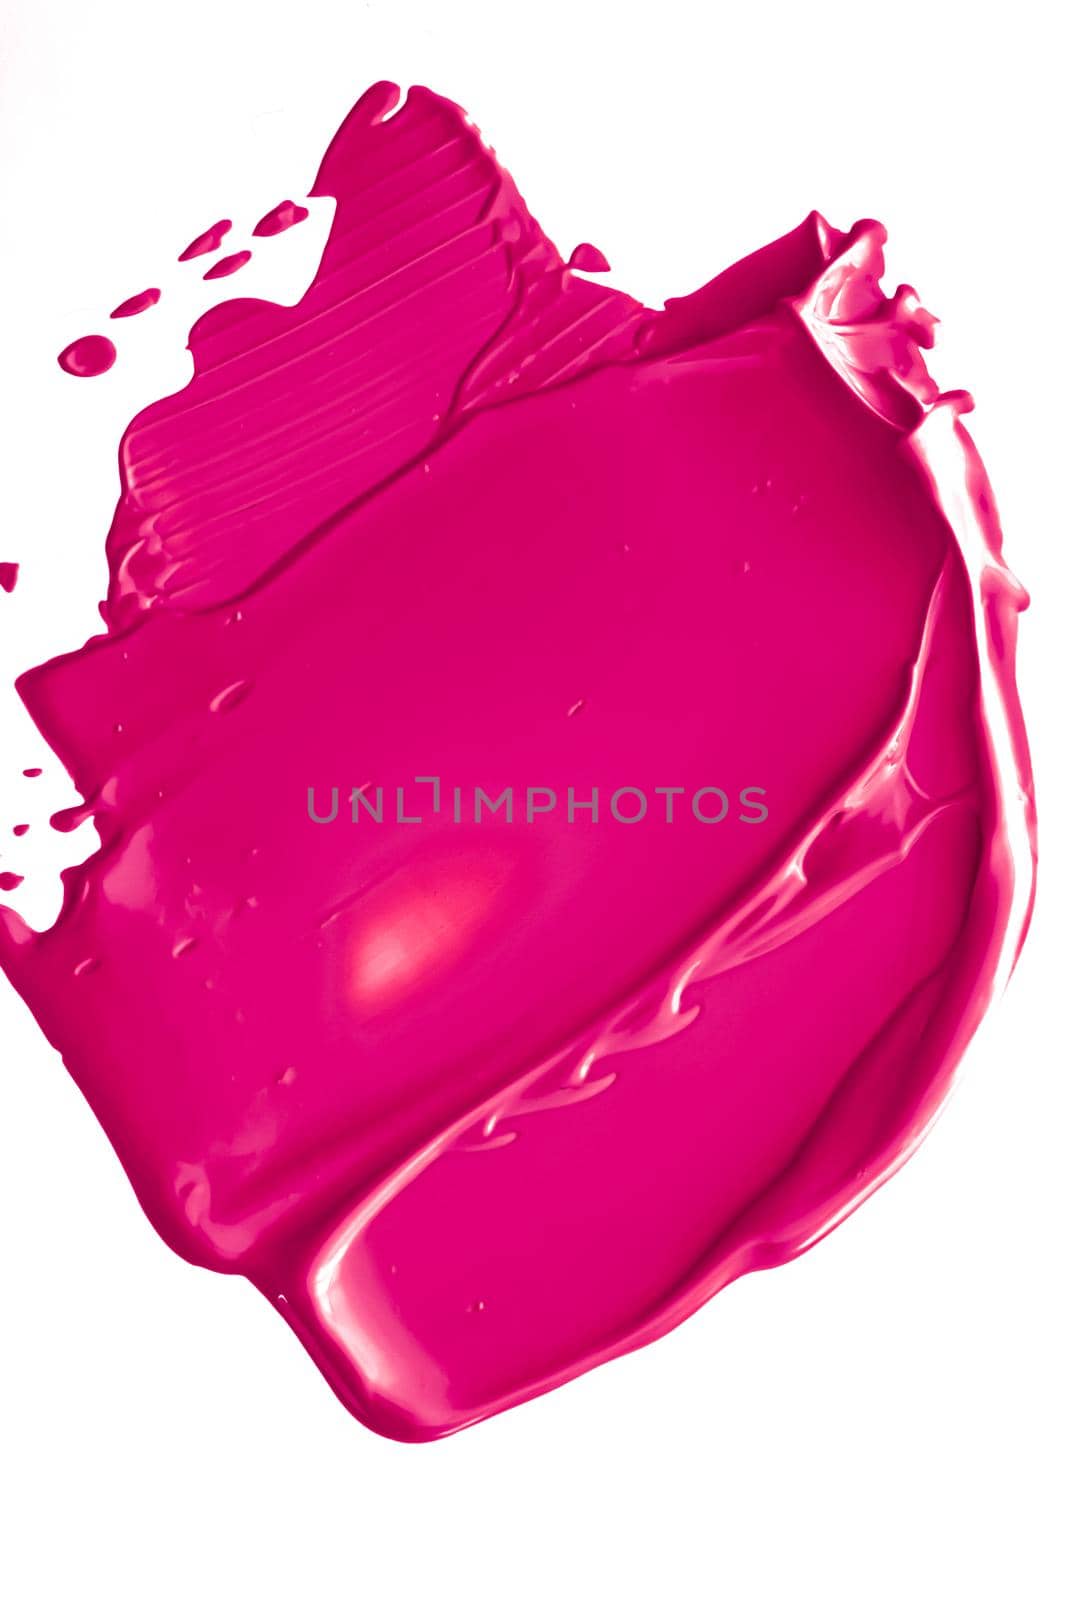 Pink beauty swatch, skincare and makeup cosmetic product sample texture isolated on white background, make-up smudge, cream cosmetics smear or paint brush stroke closeup